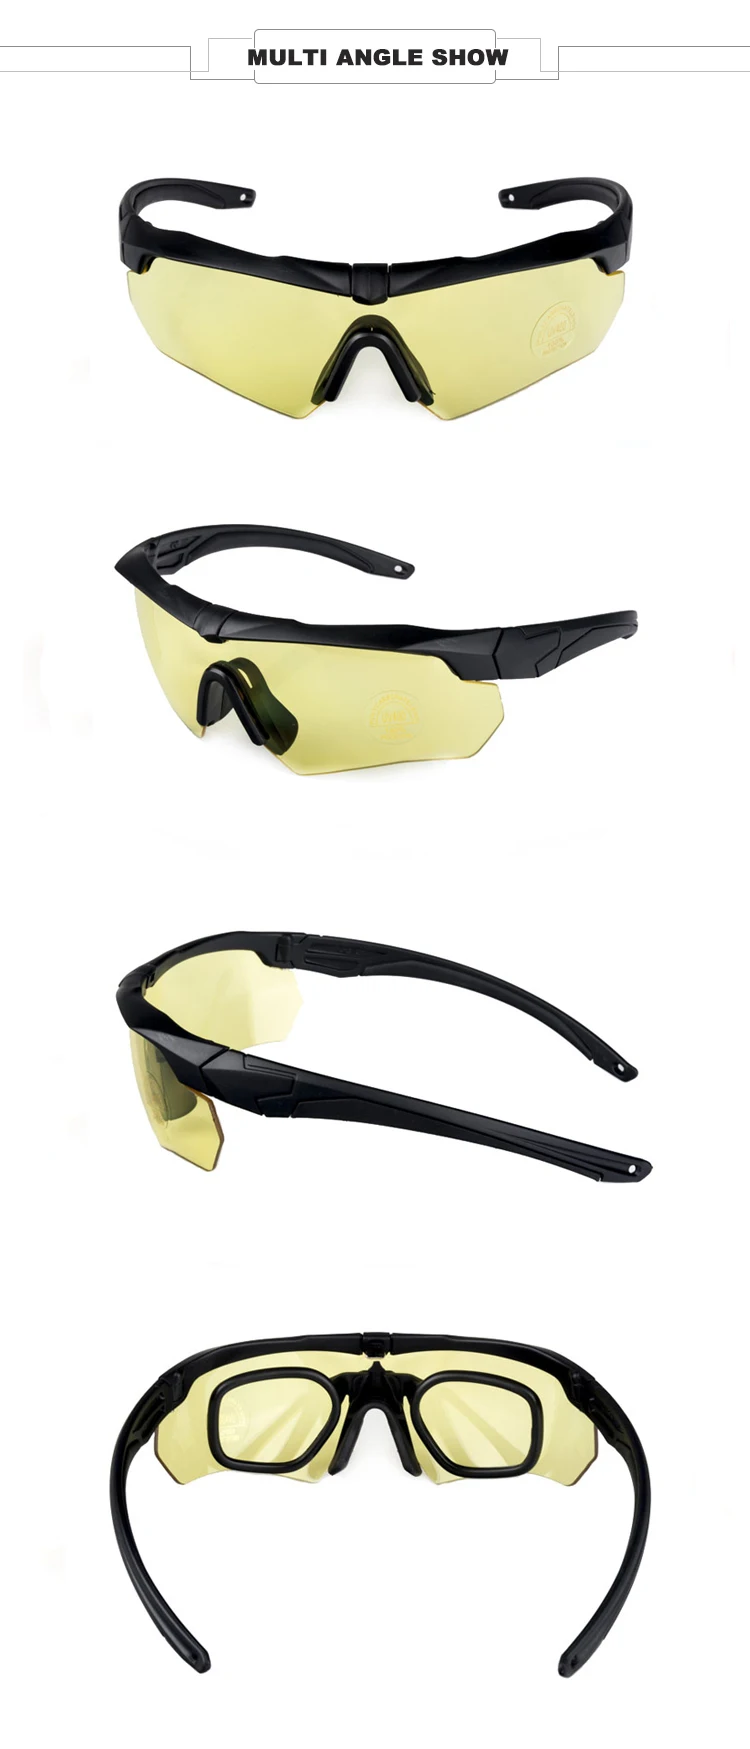 China manufacturers custom eye protection safety glasses